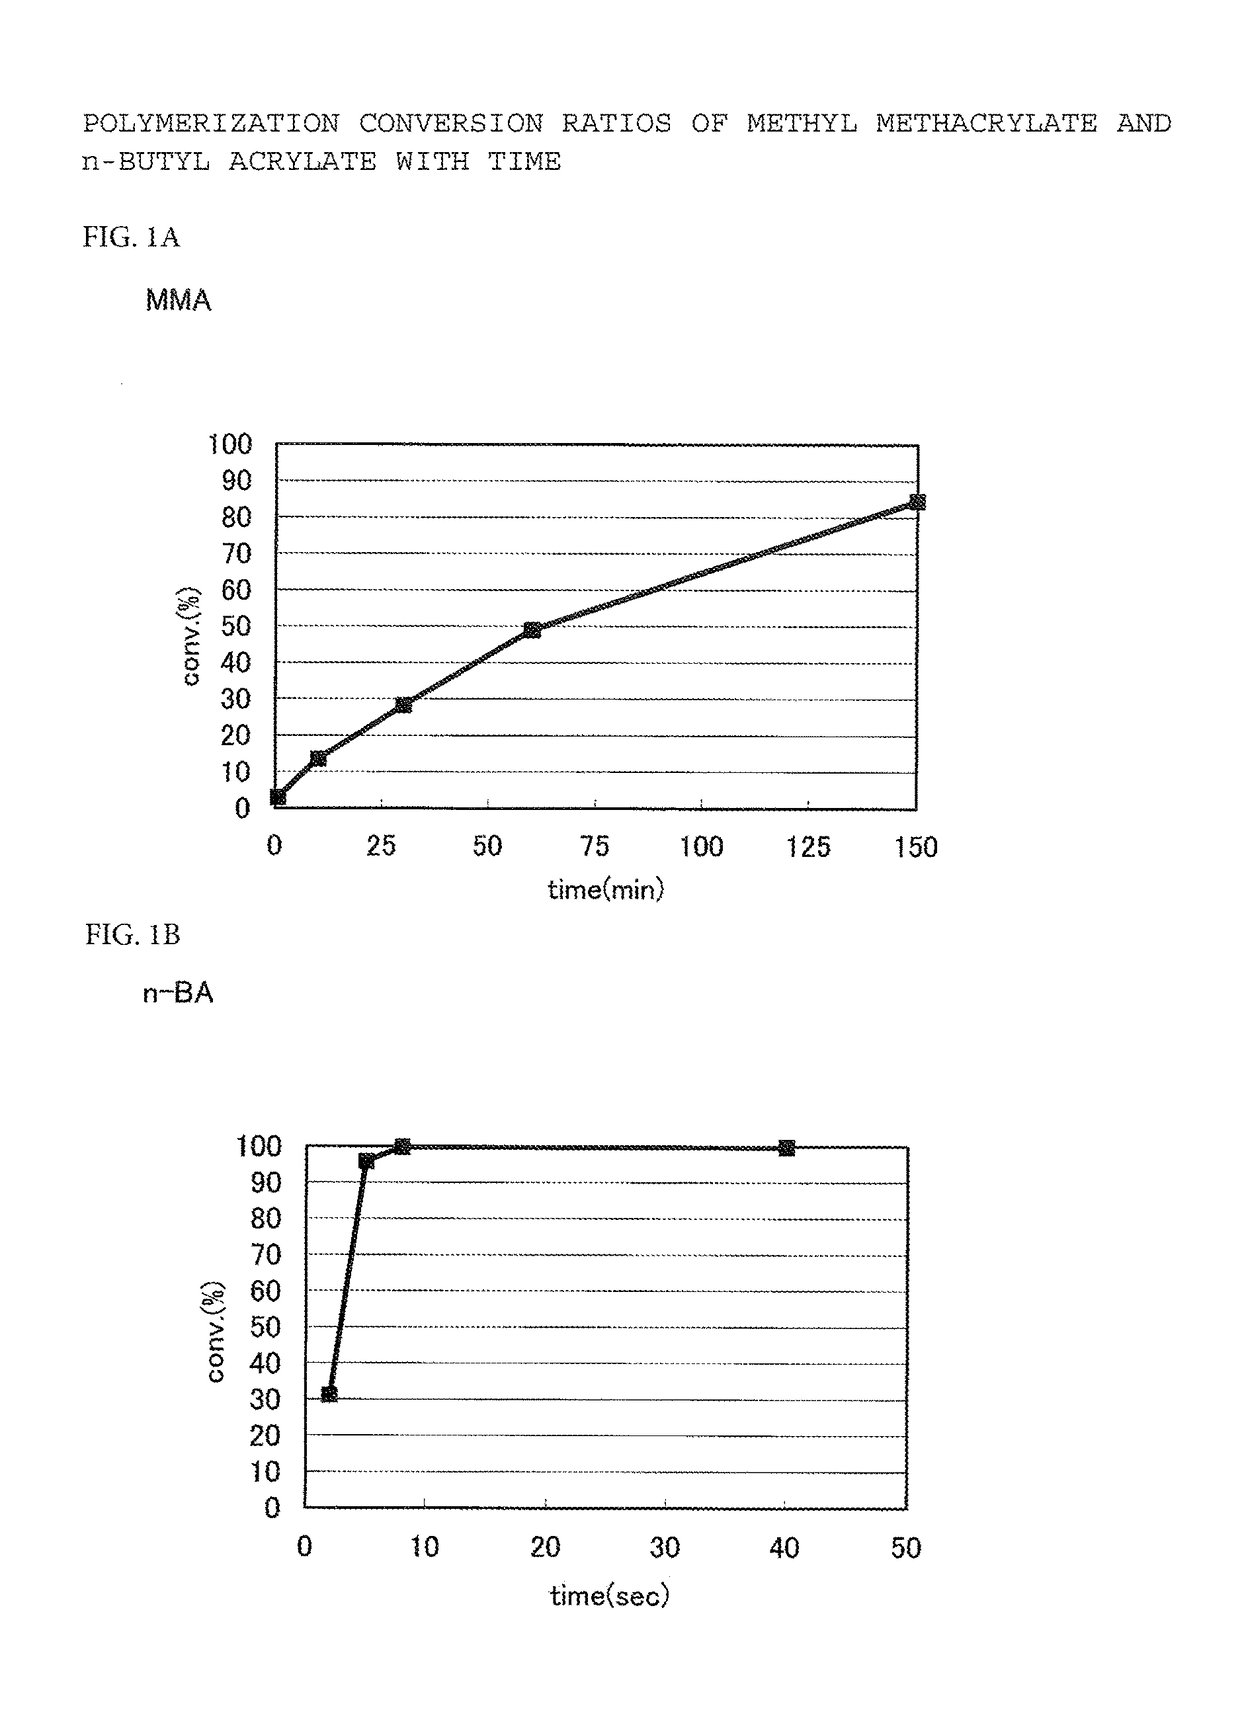 Adhesive containing block copolymer